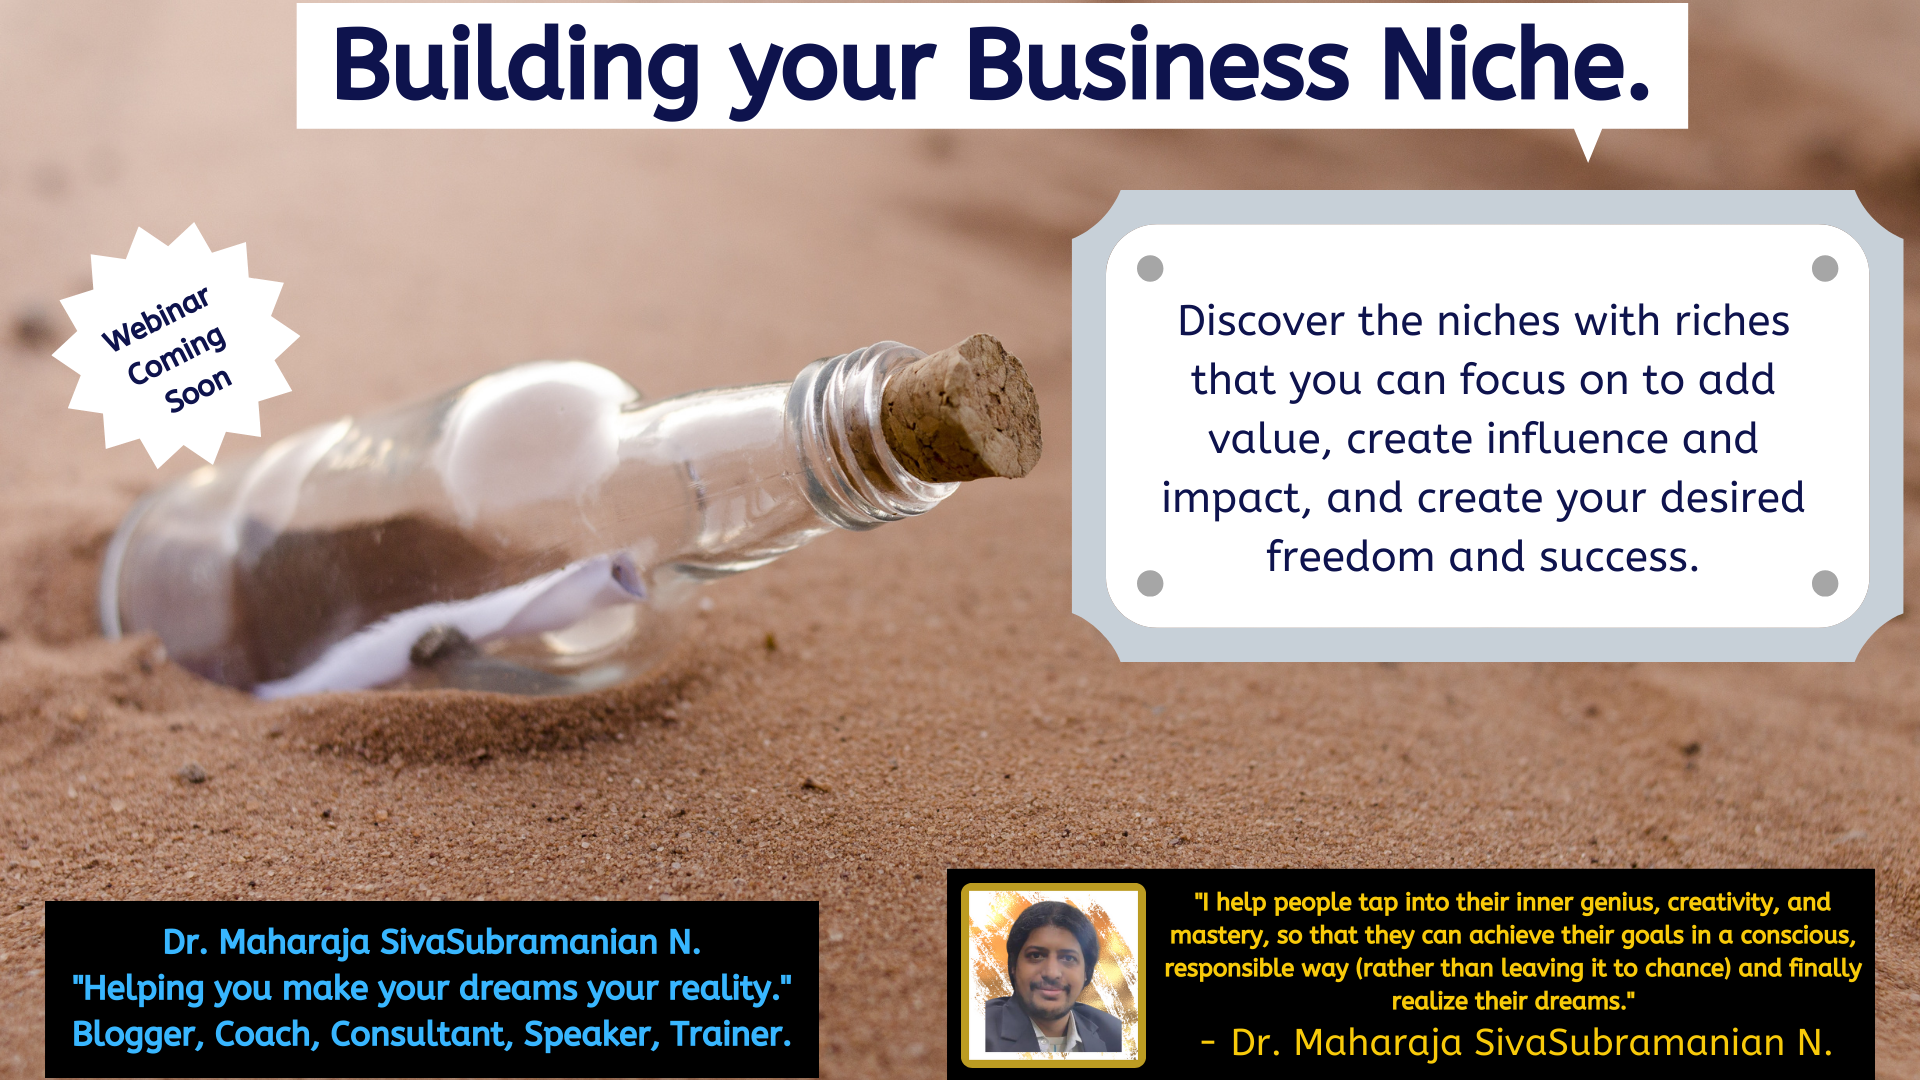 Building your Business Niche. – Upcoming free webinar.